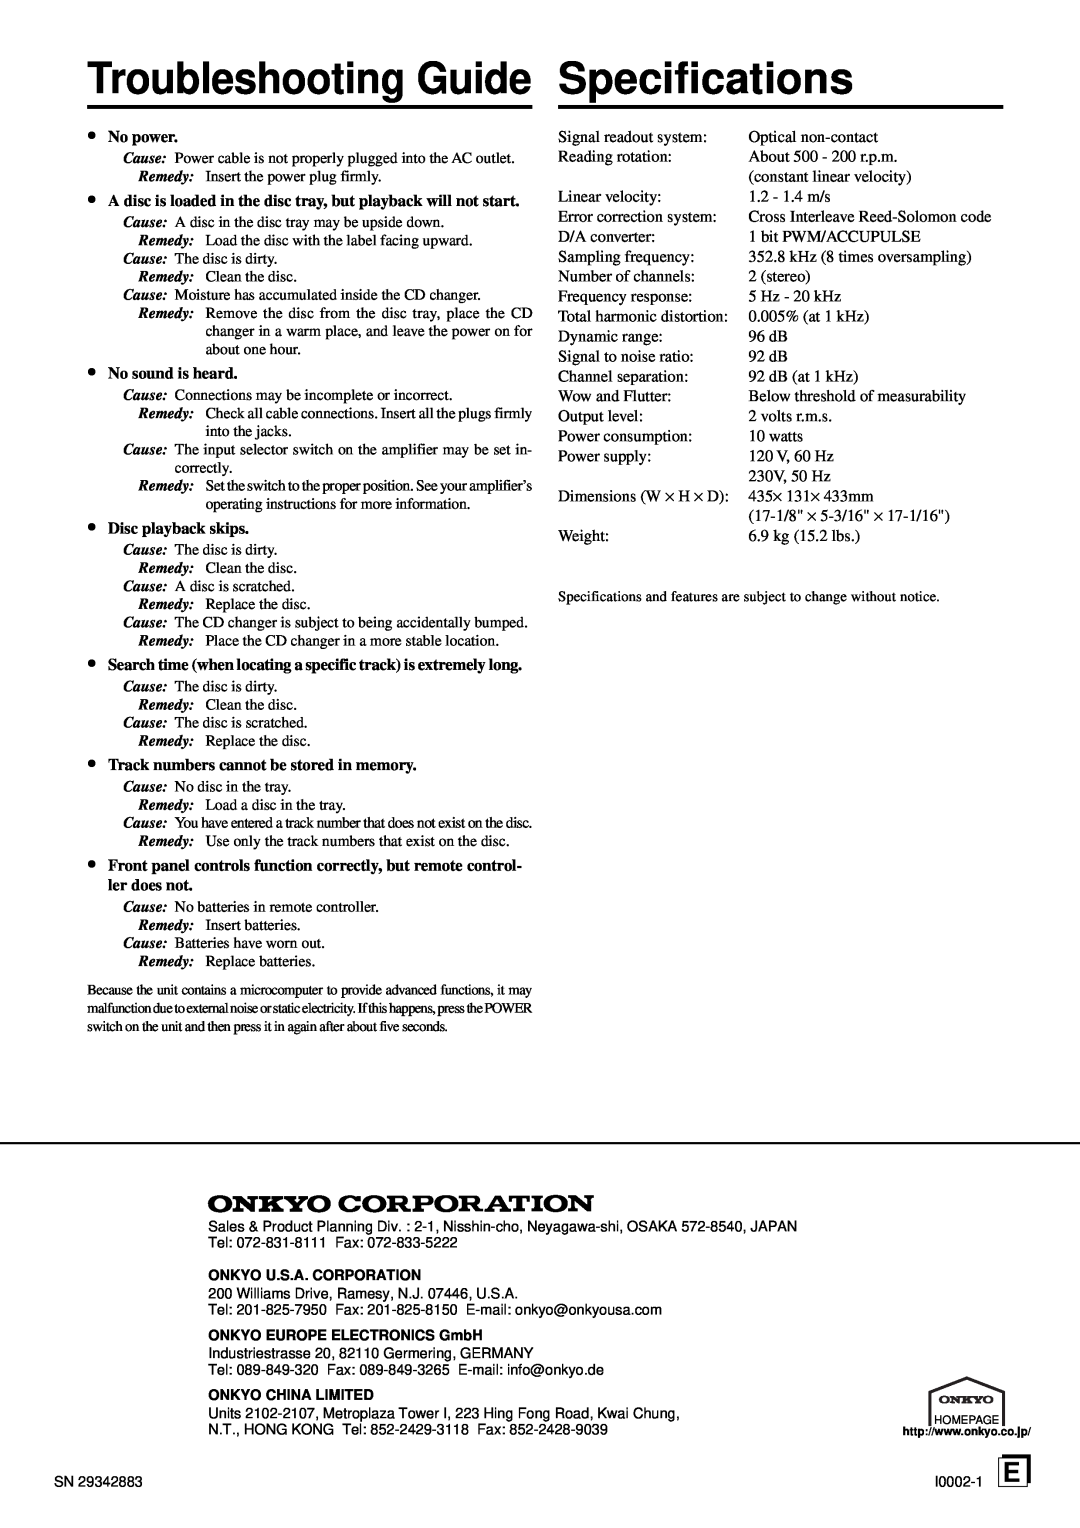 Onkyo DX-C380 instruction manual Specifications, Troubleshooting Guide 